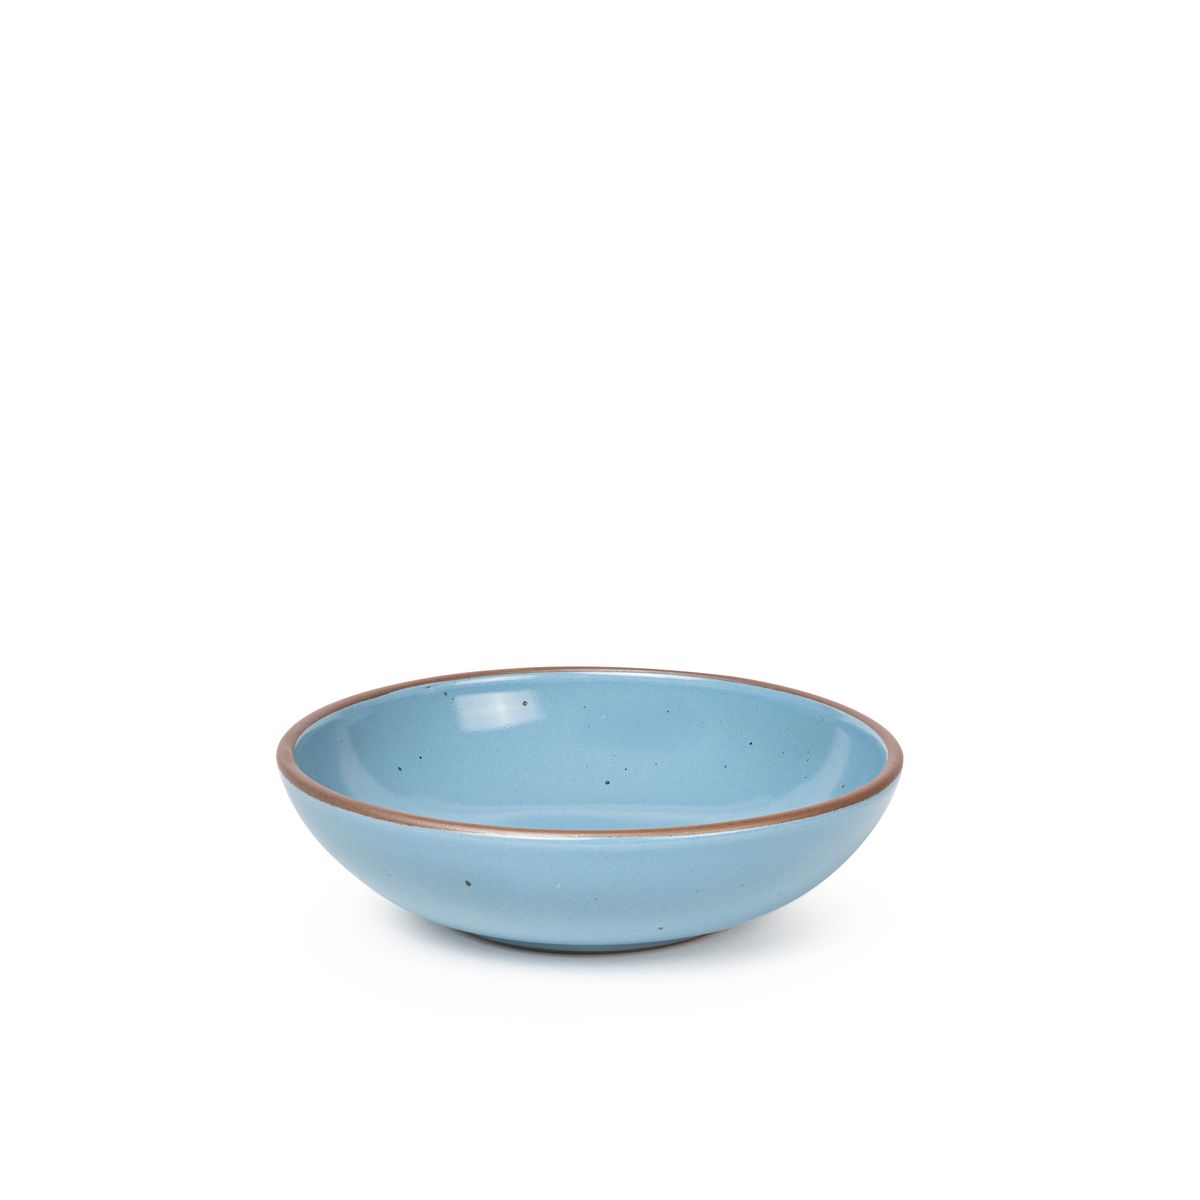 A dinner-sized shallow ceramic bowl in a robin's egg blue color featuring iron speckles and an unglazed rim